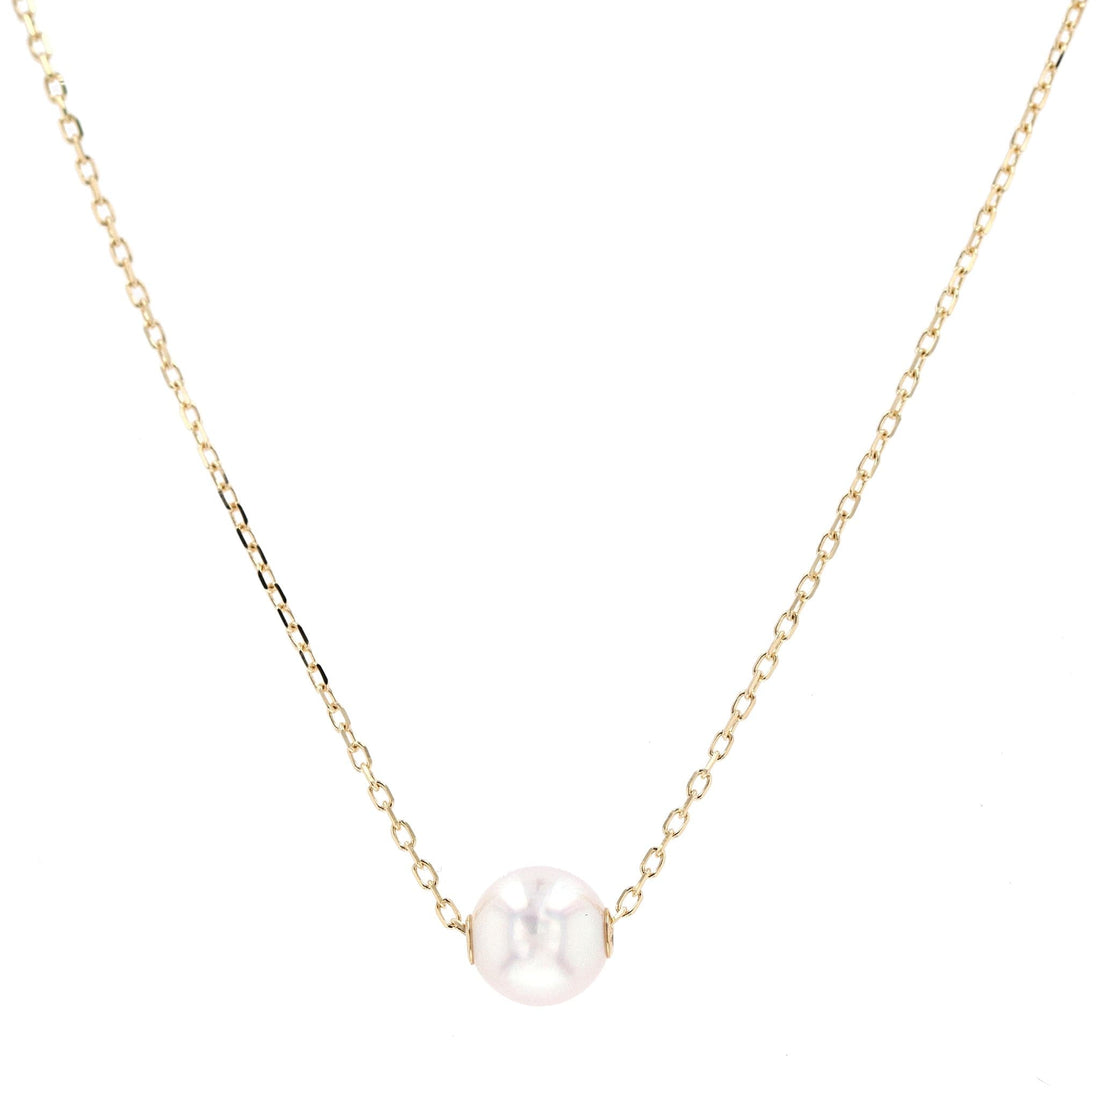 Mikimoto Pearl Pendant Necklace in 18k Yellow Gold